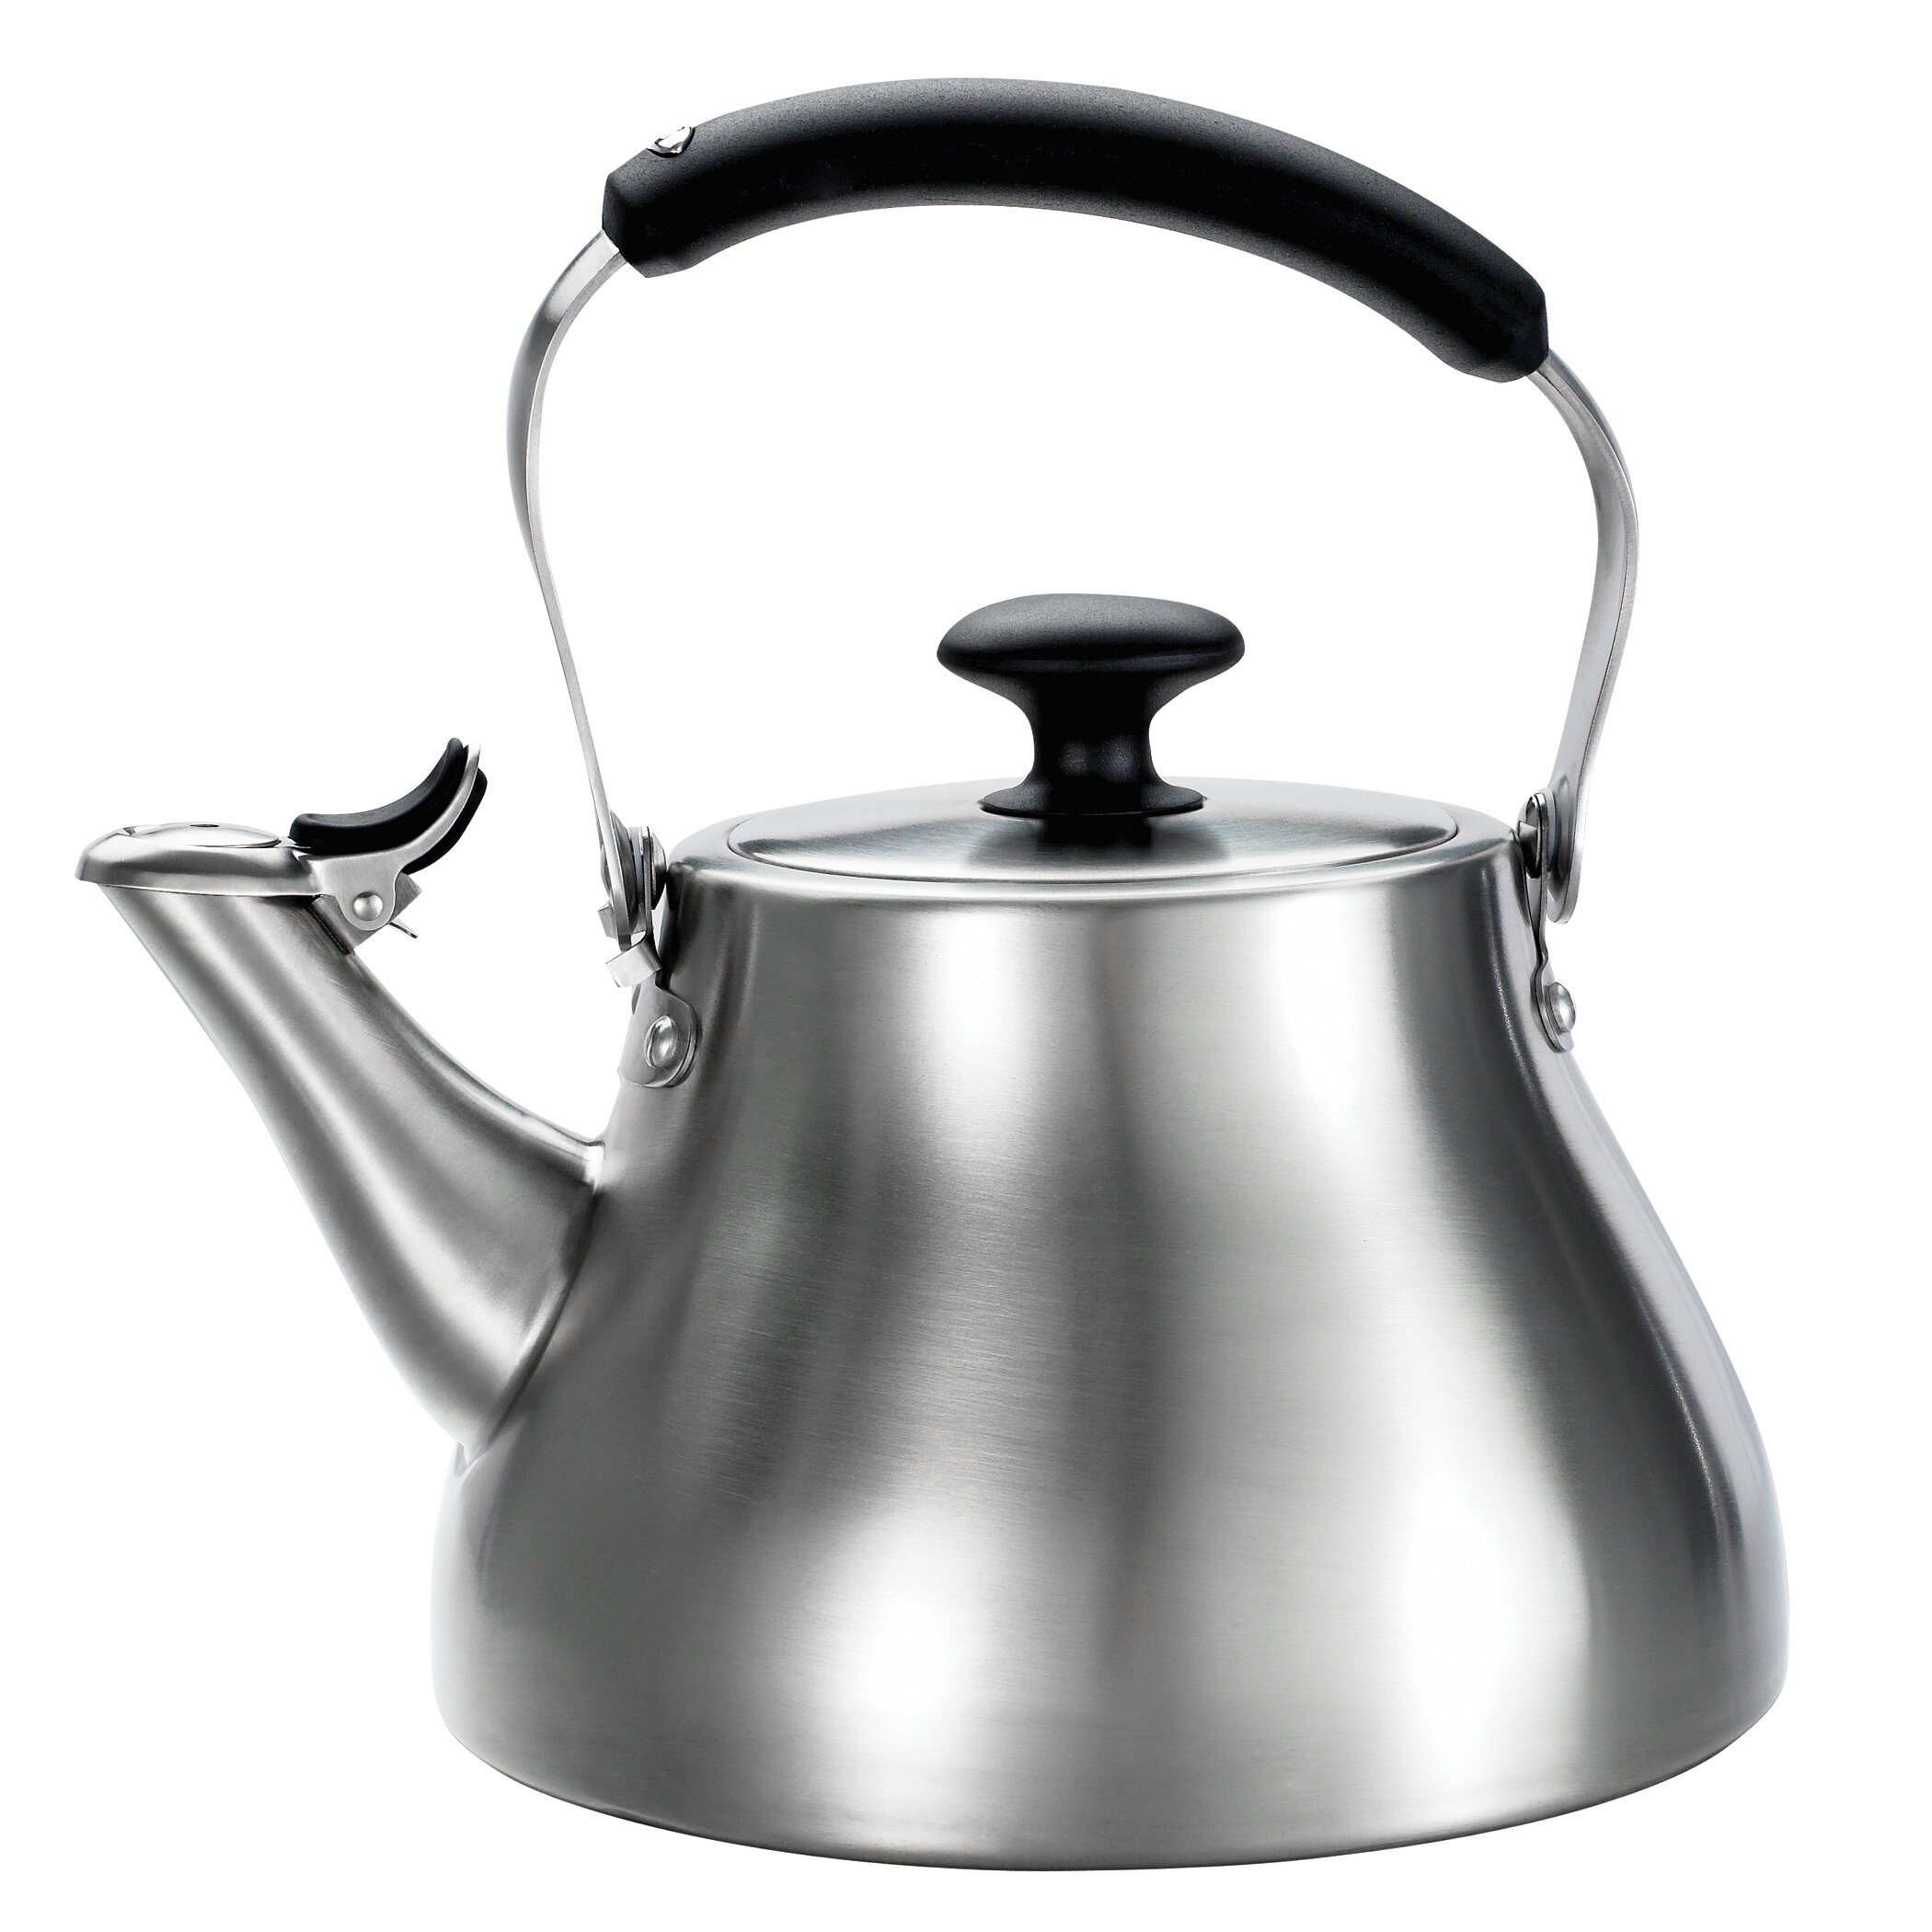 Tea Kettle Made In Usa - Ideas on Foter